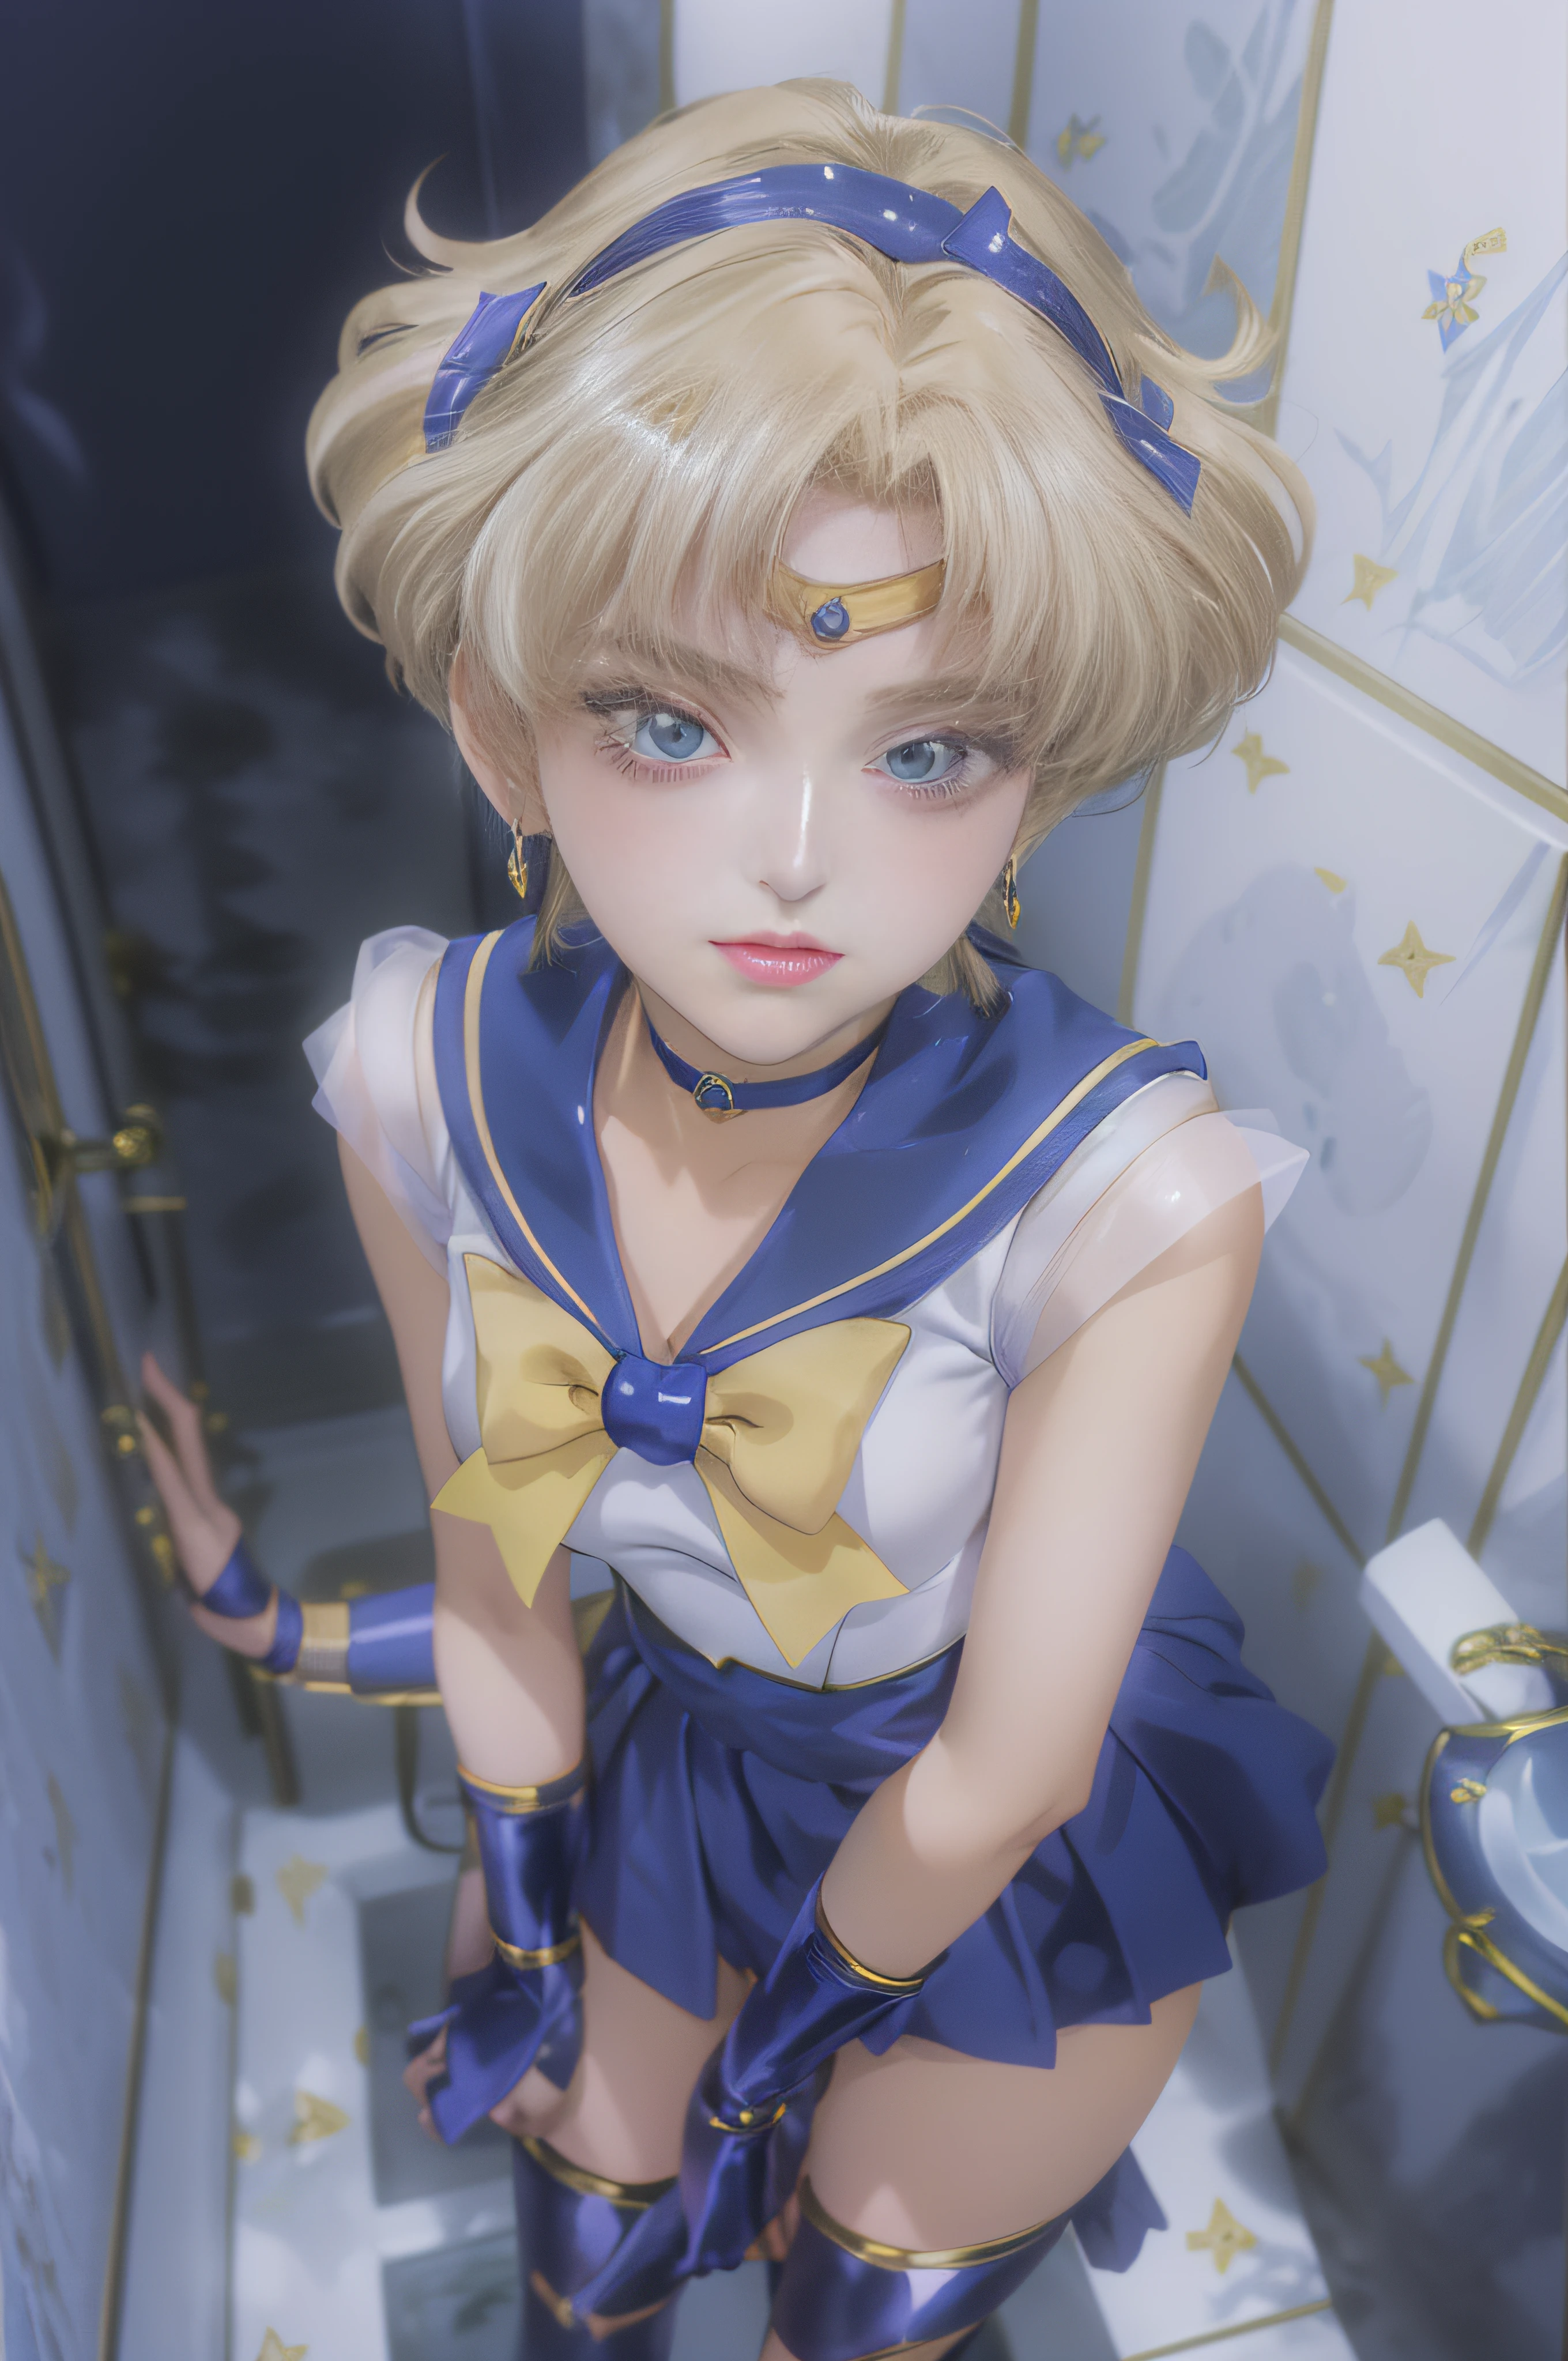 Sailor Uranus in short skirt and bow tie standing in bathroom, Sailor Moon Style, Portrait of a female anime hero, portrait knights of zodiac girl, today's featured anime still, Official art, knights of zodiac girl, by Sailor Moon, portrait anime space cadet girl, anime still, official anime still, sailor moon aesthetic, Sailor Uniform, official anime artwork